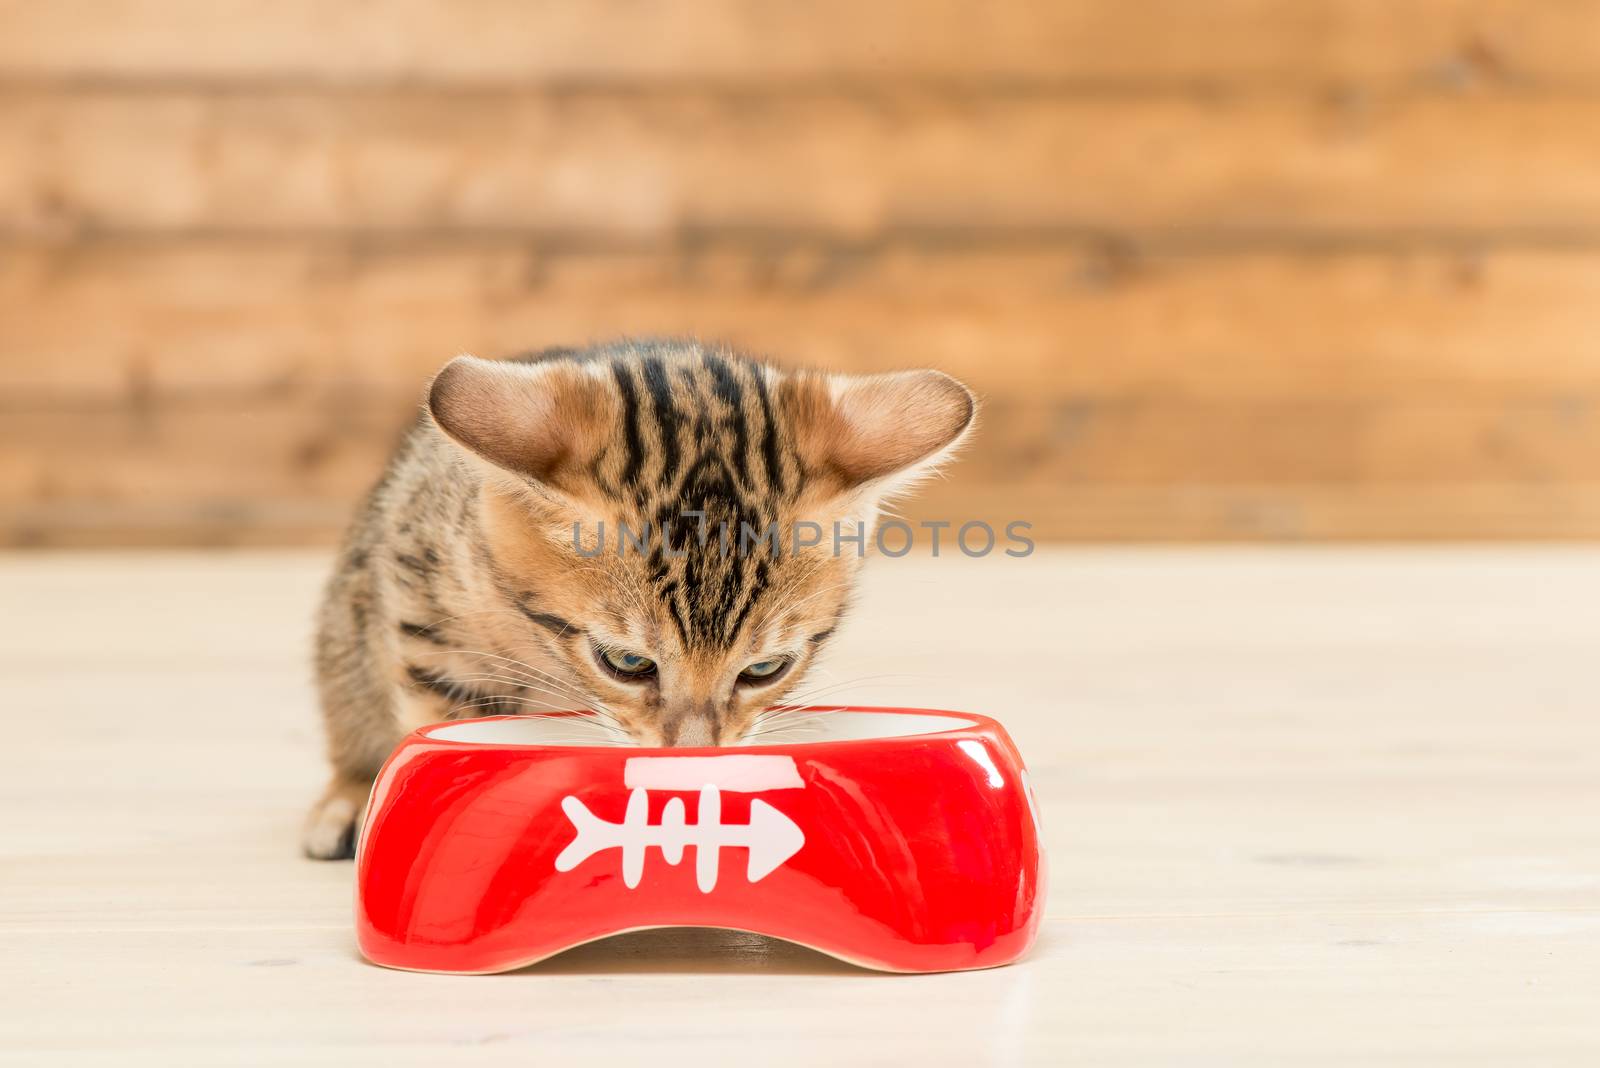 little bengal kitten drinking milk from a bowl by kosmsos111